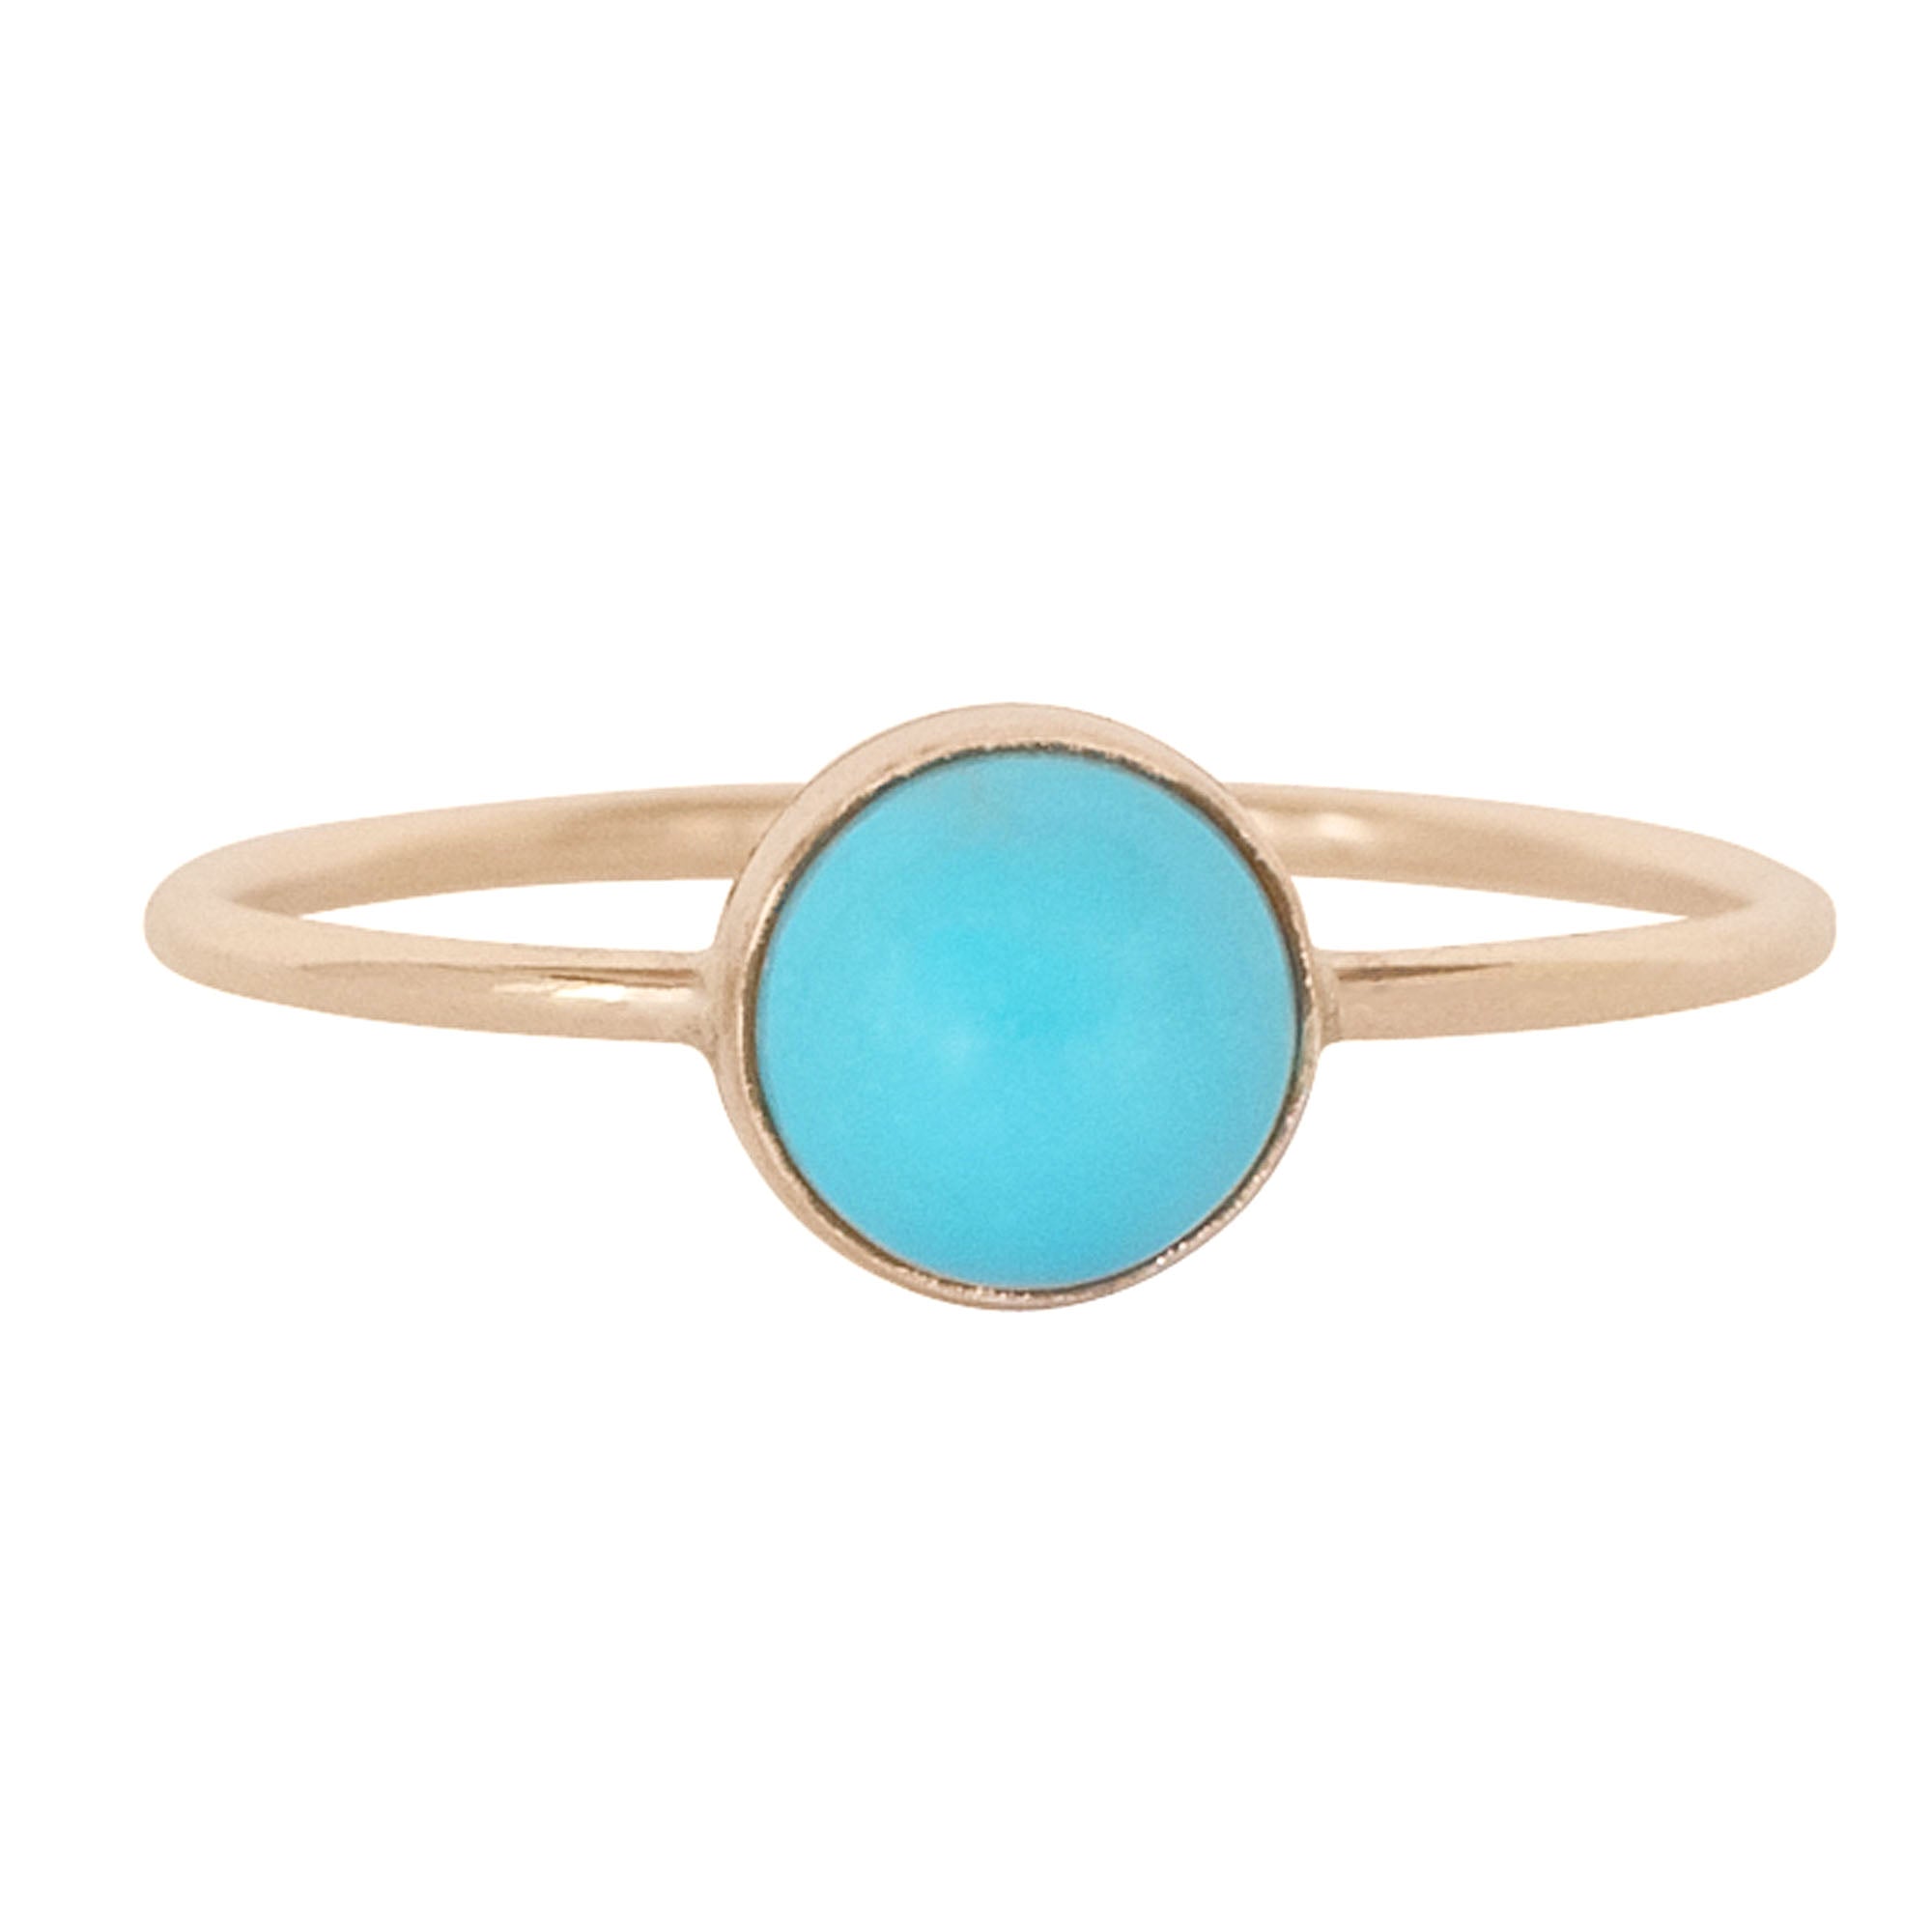 Ethically Mined Turquoise Gumdrop Ring - Favor Jewelry